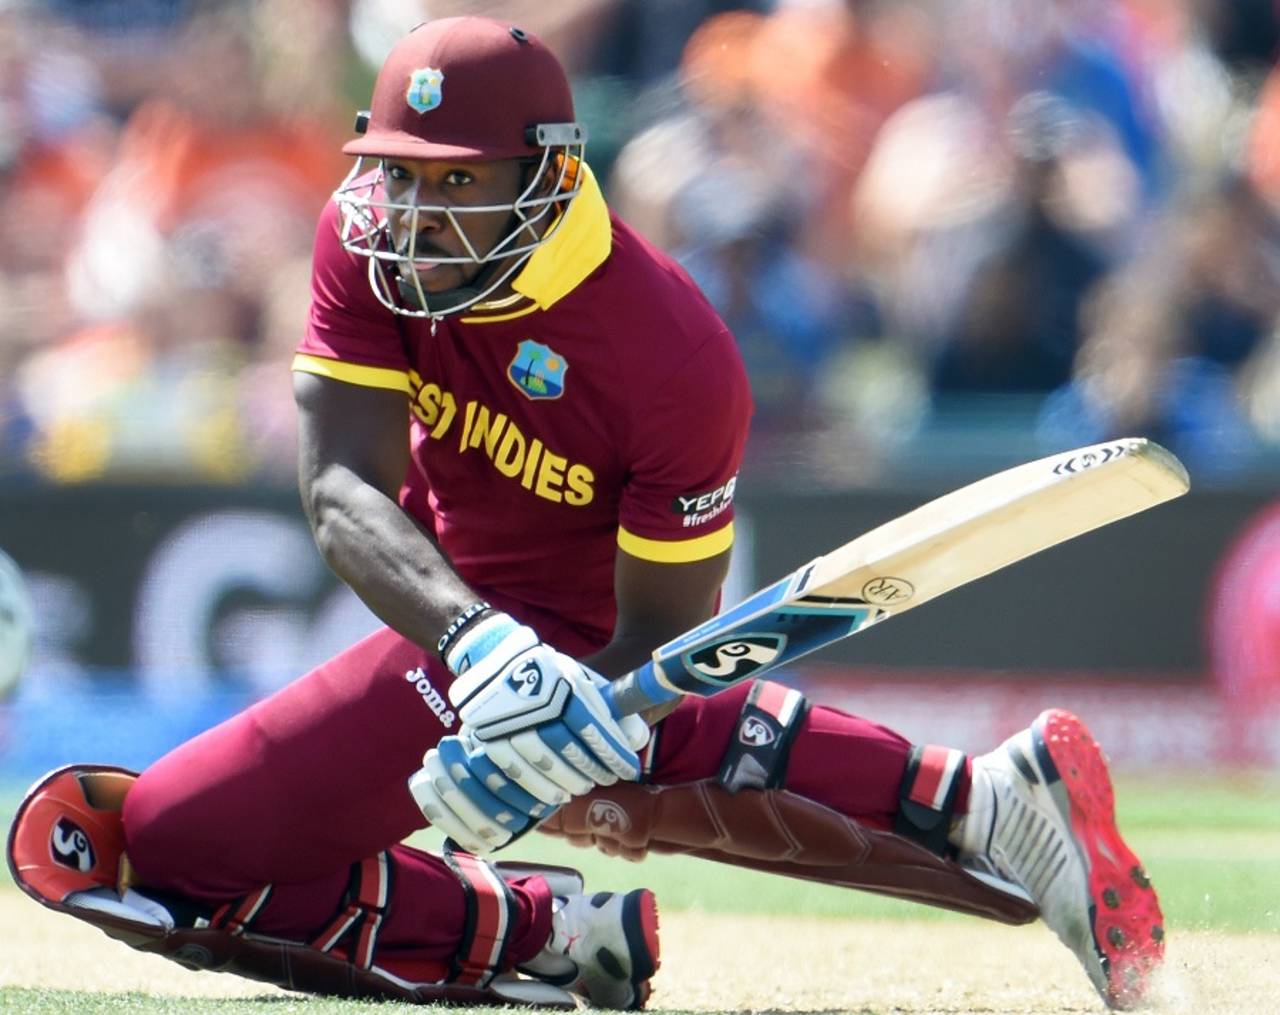 Chris Gayle did not tee off but Andre Russell's swashbuckling innings was high on entertainment value&nbsp;&nbsp;&bull;&nbsp;&nbsp;AFP